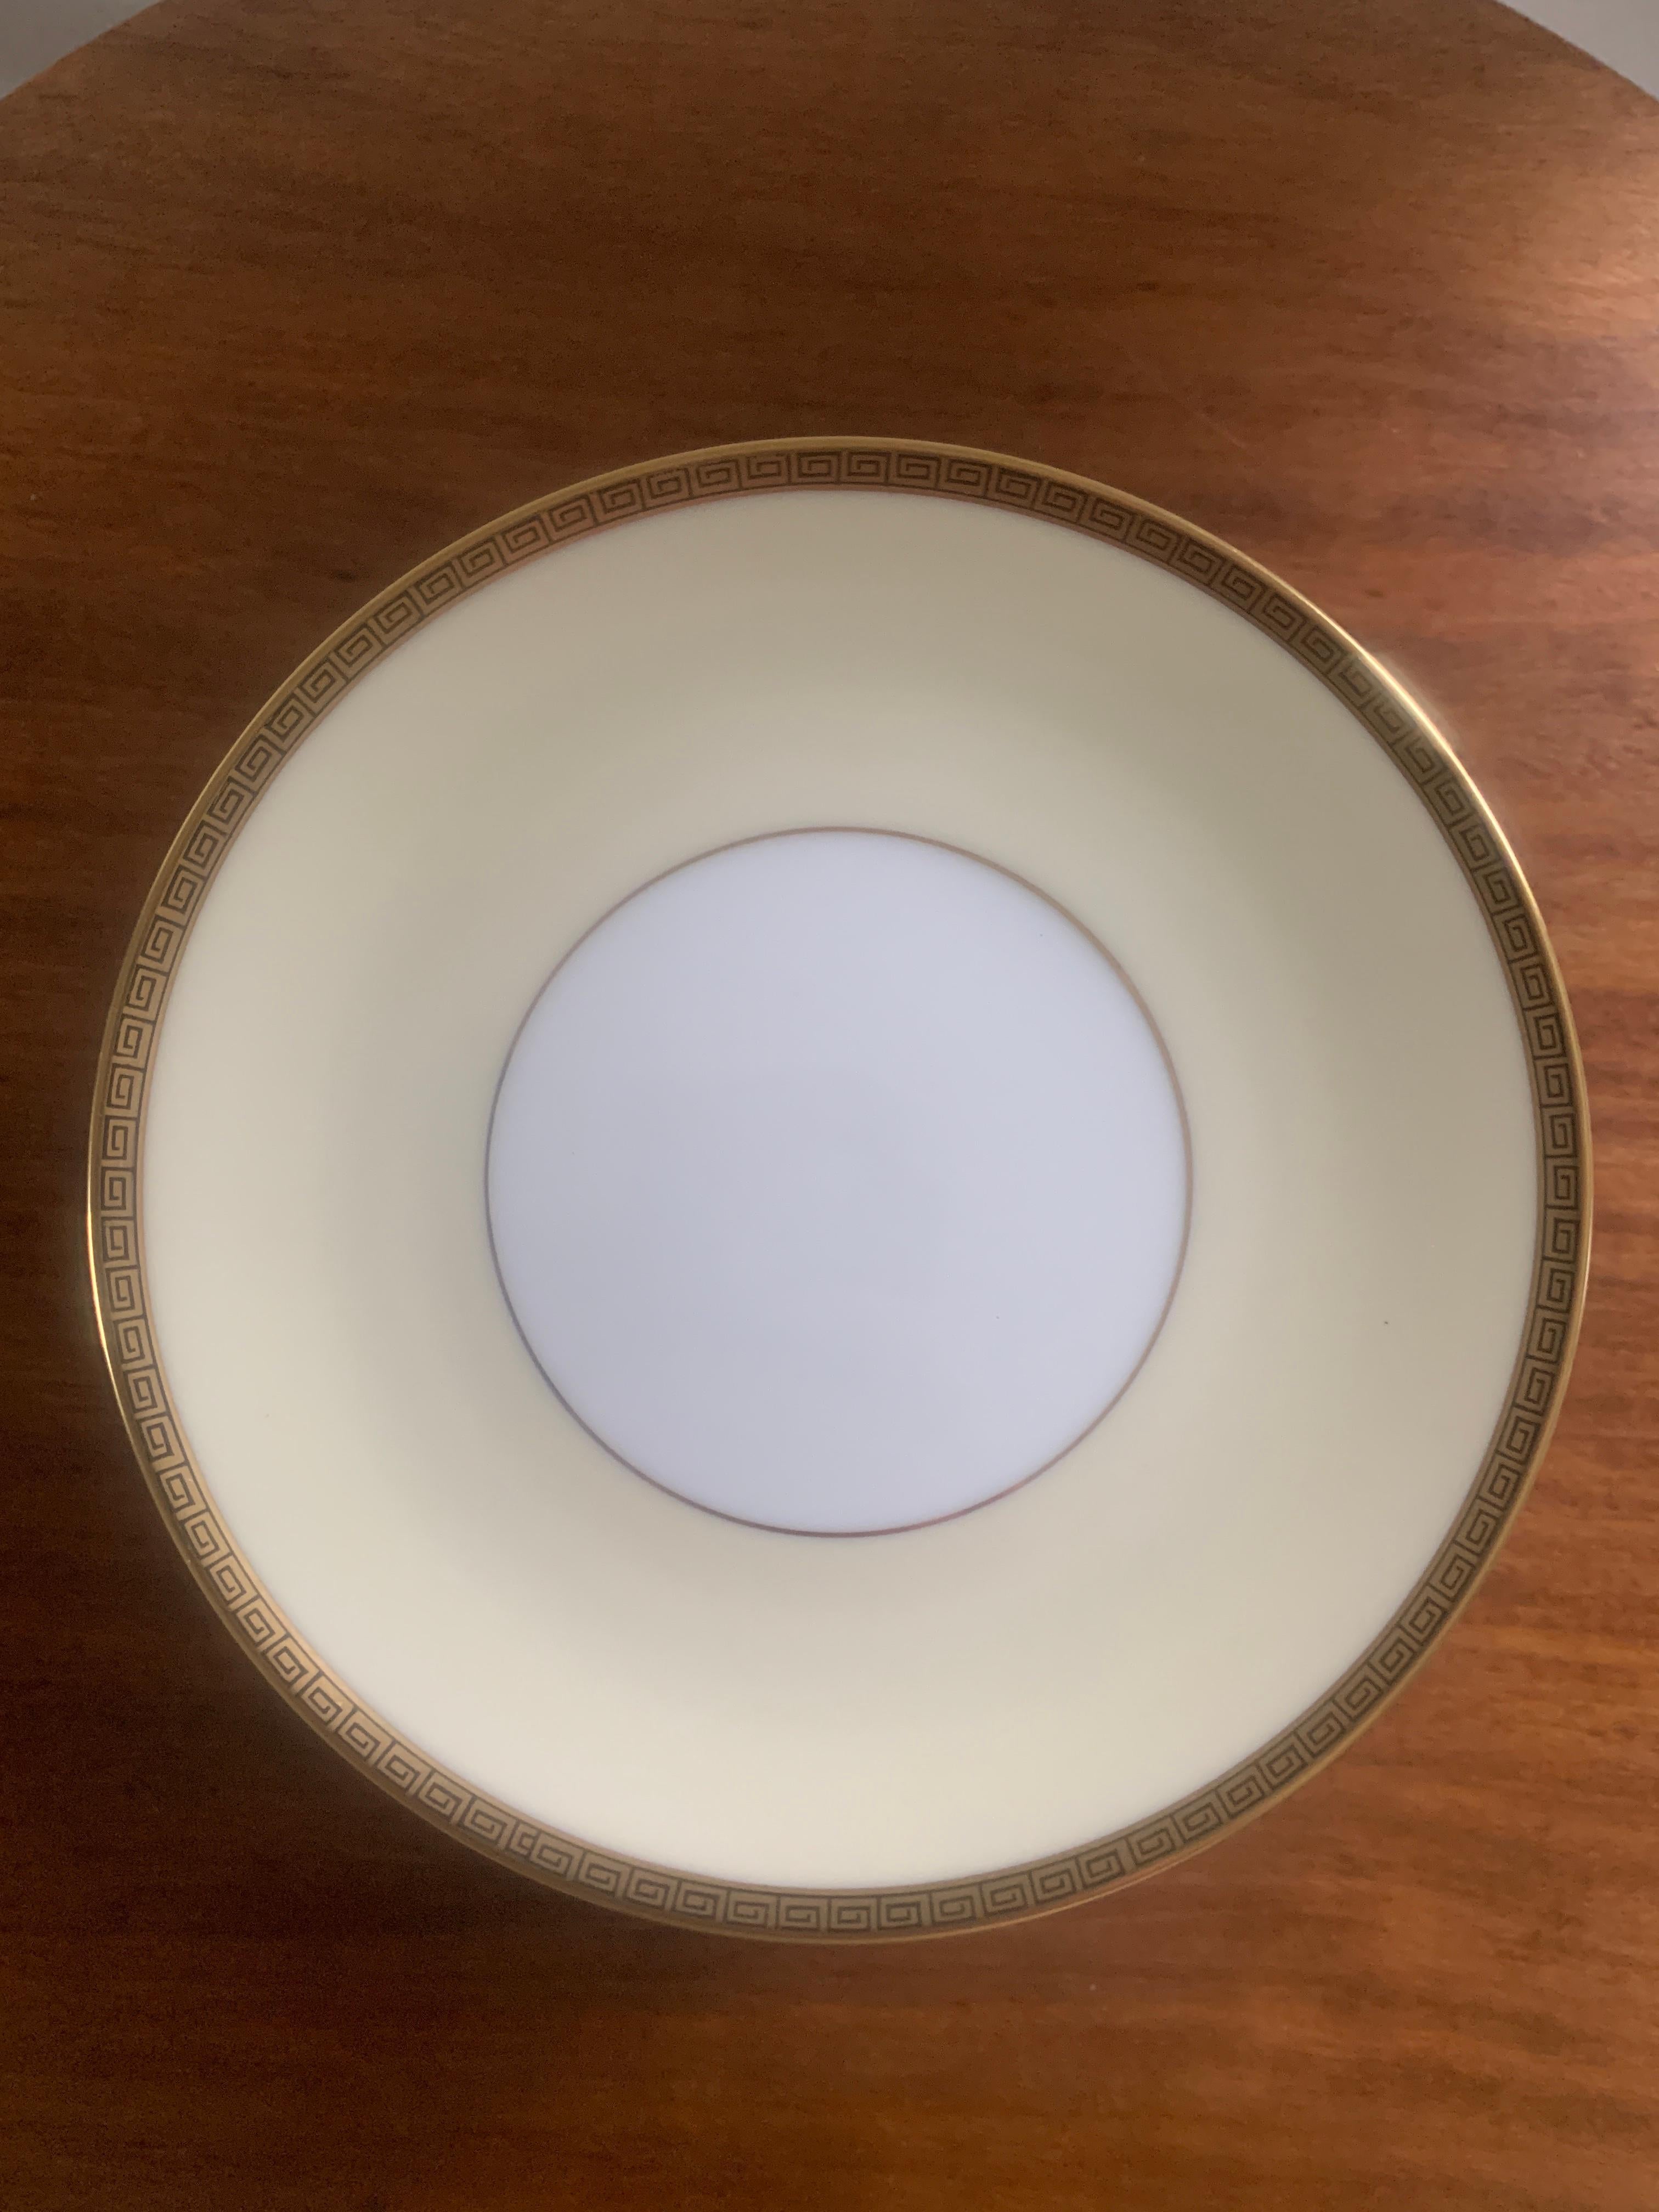 A gorgeous set of china with Greek key rim, service for 8 including dinner, salad, and bread plates

By Nortitake

Japan, Circa mid-20th century

Dinner plate: 10